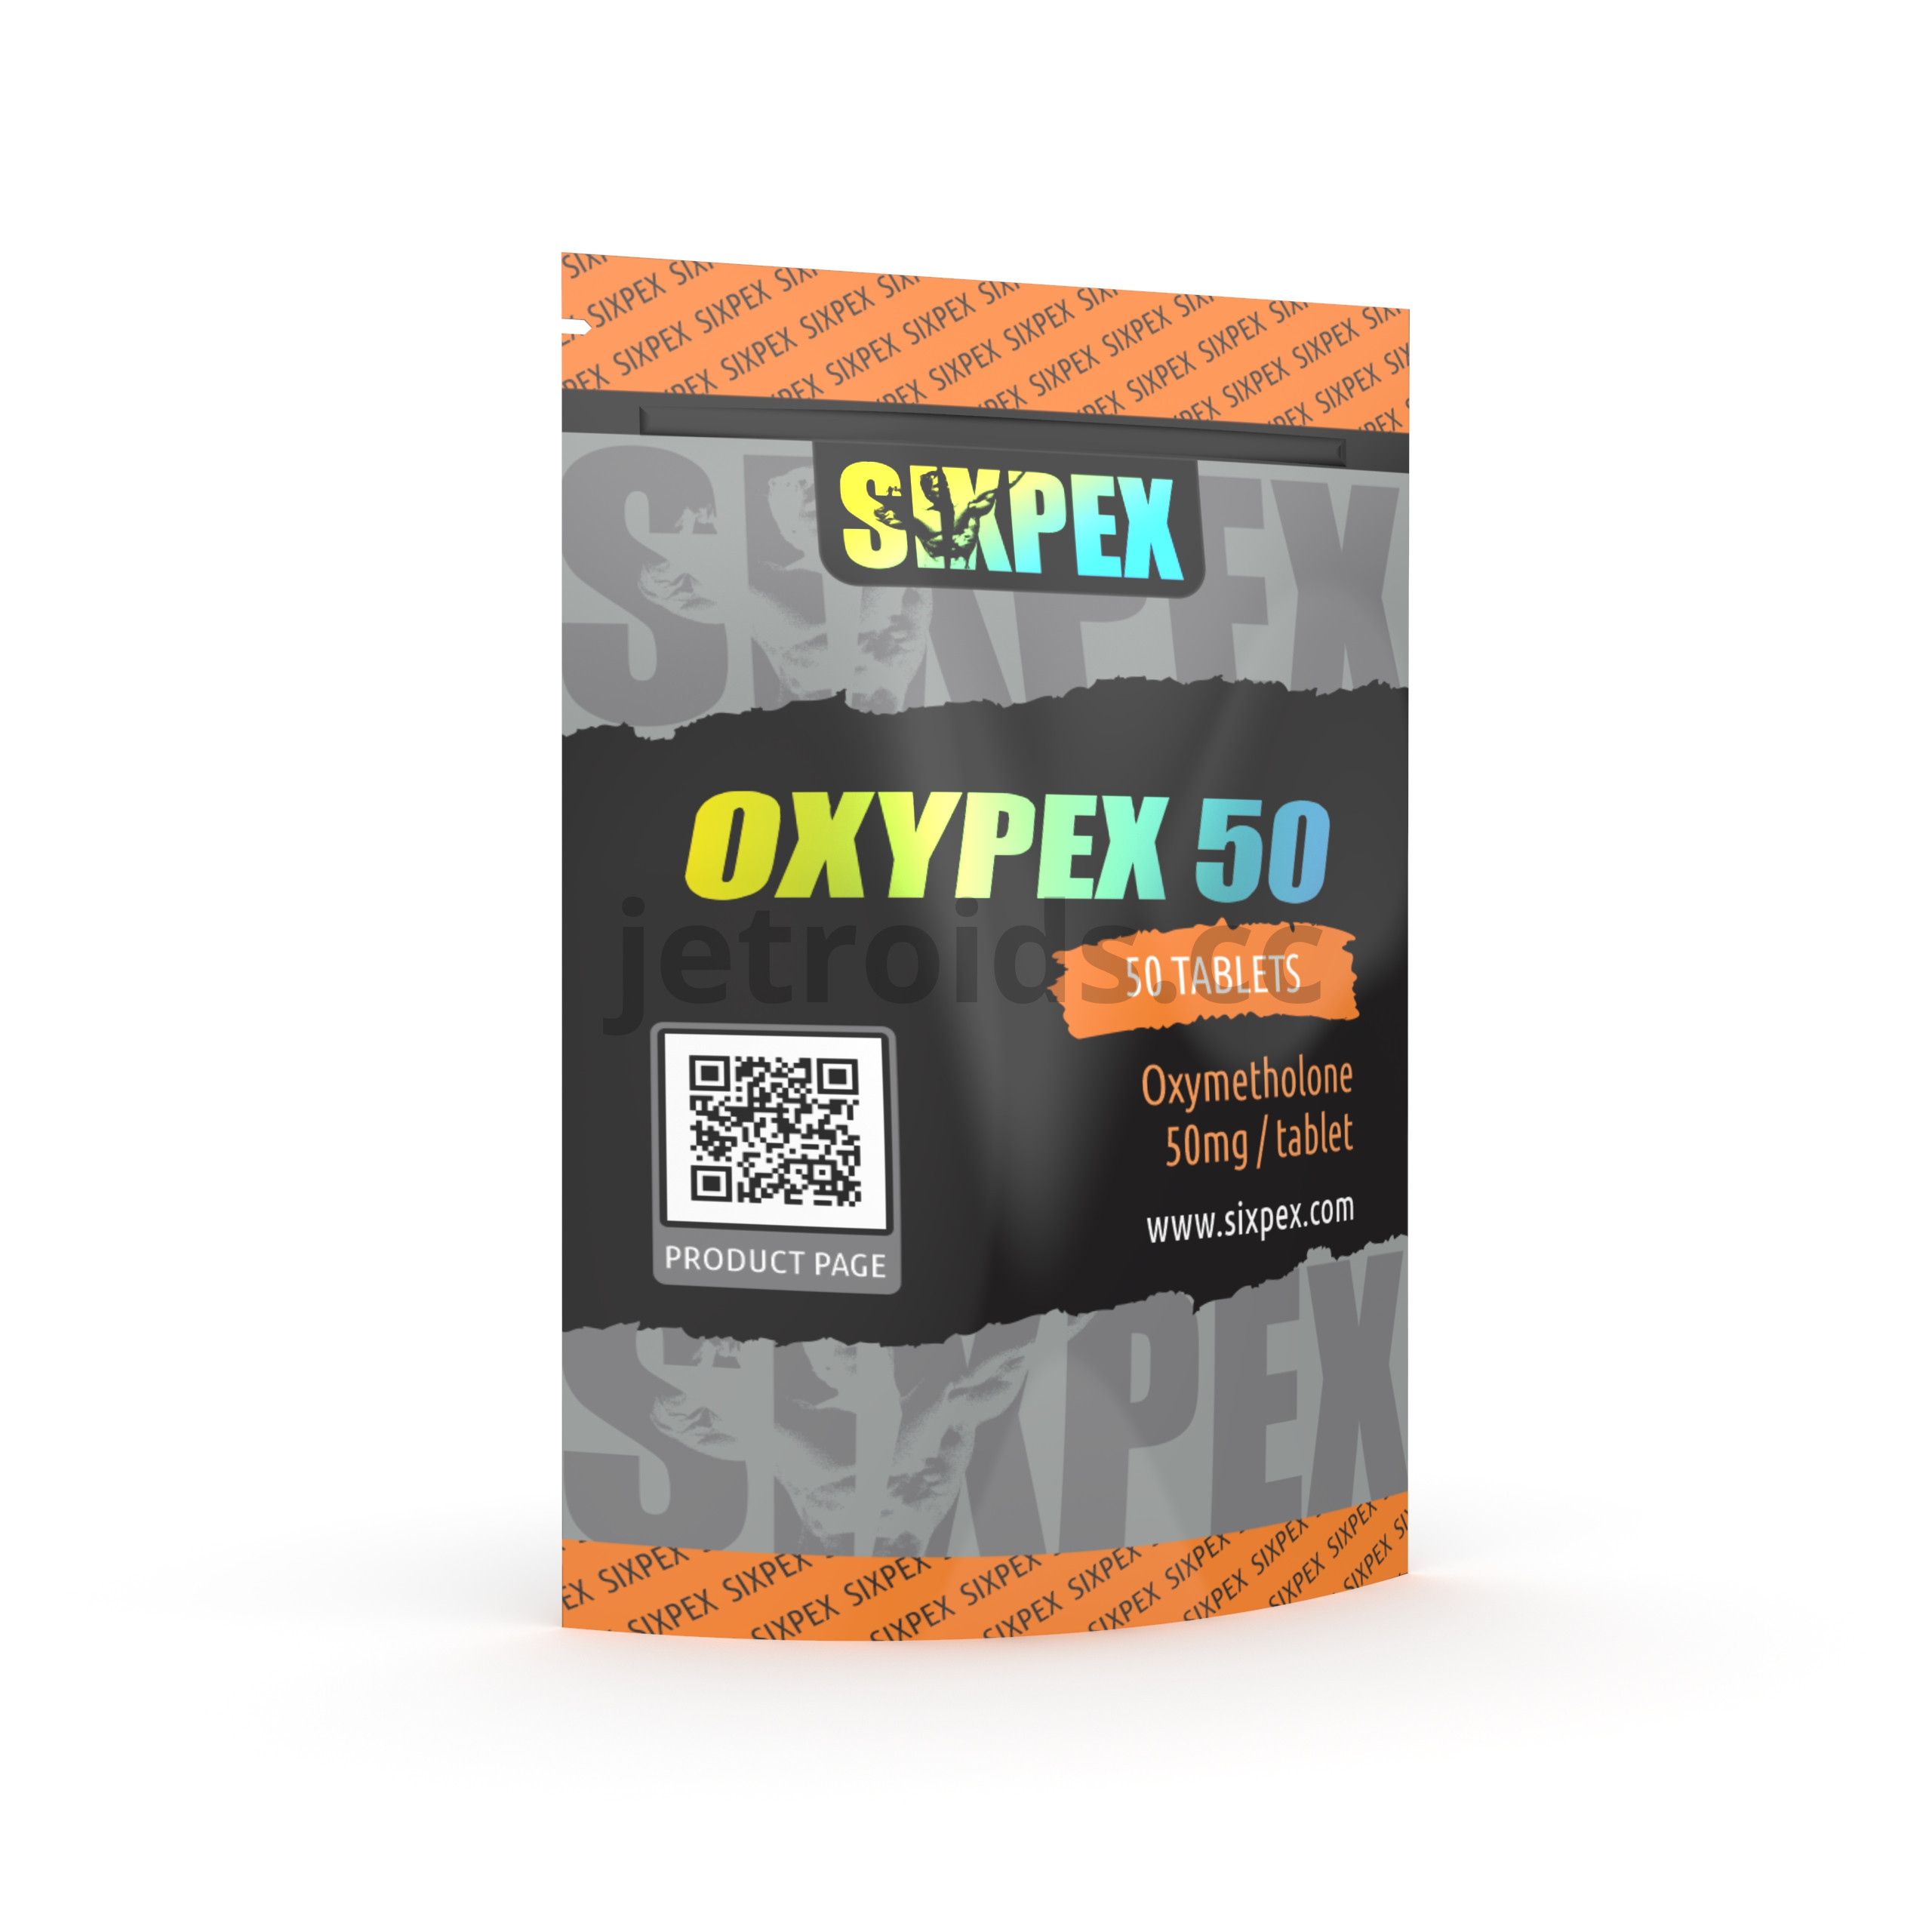 Sixpex Oxypex 50 Product Info